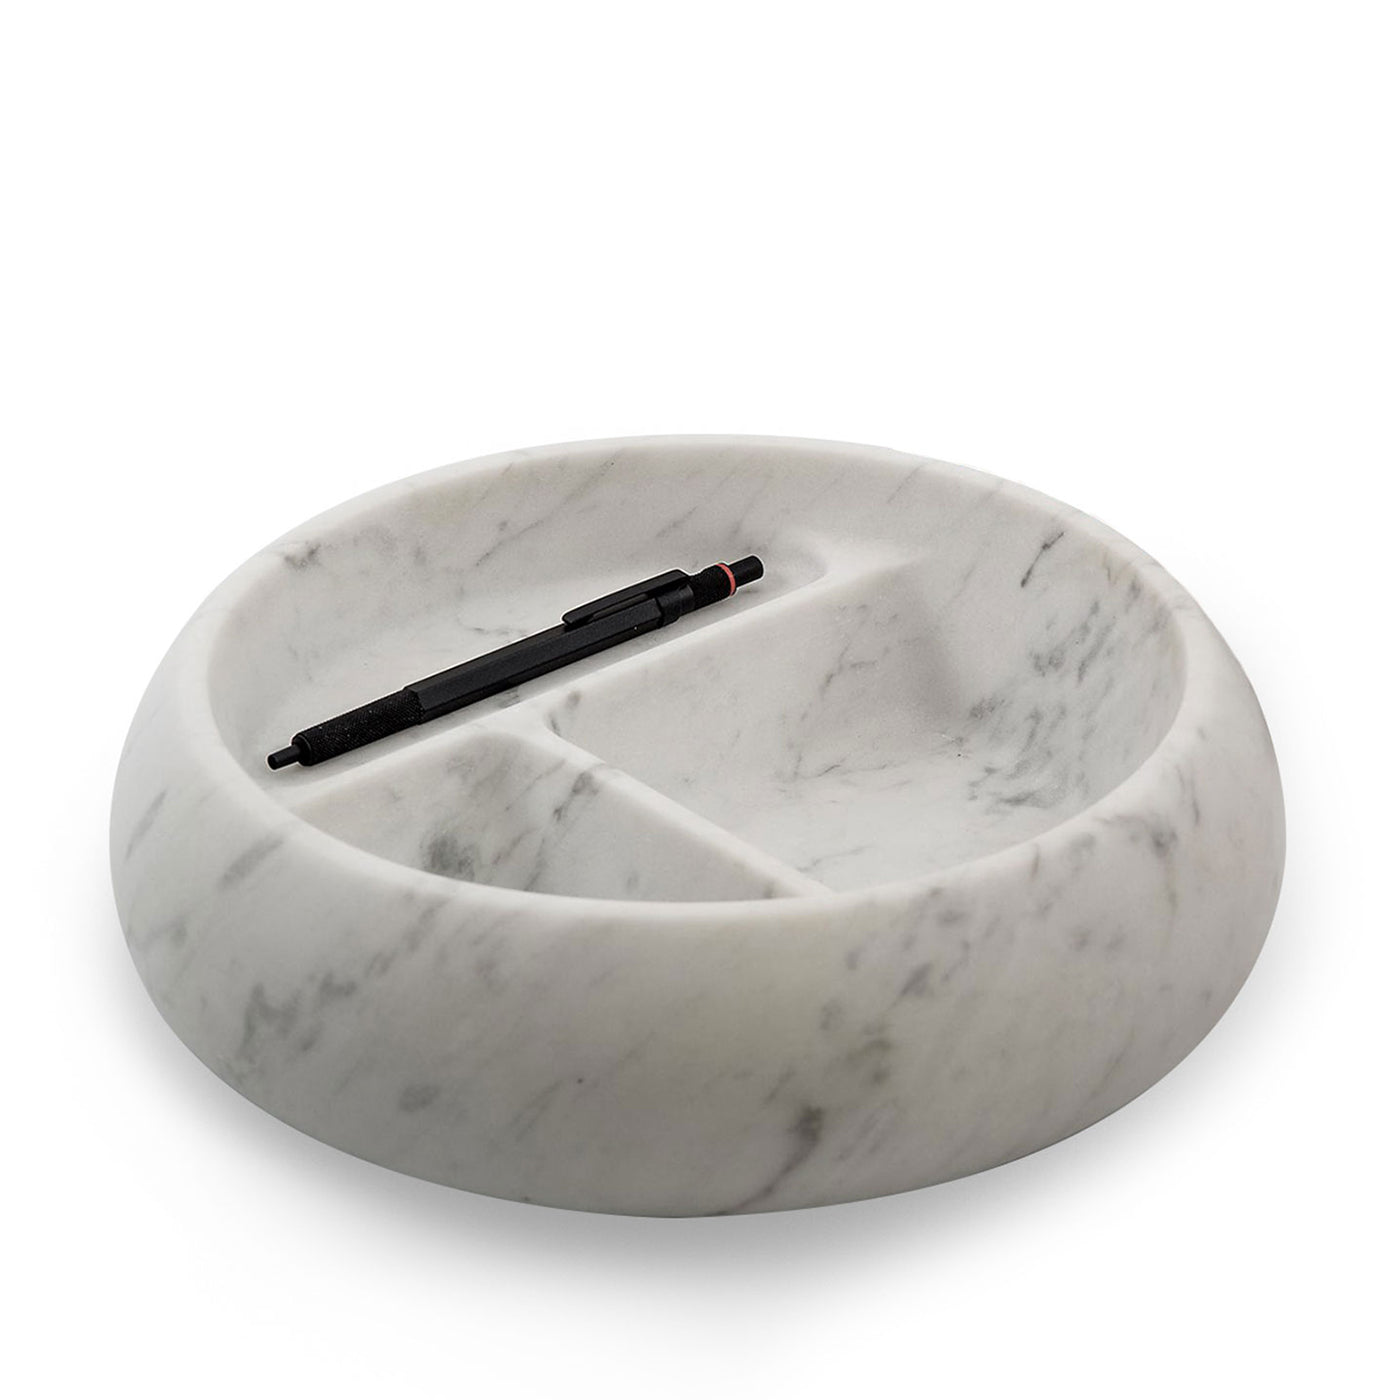 Sasso Serving Bowl with Tray by Mr. Smith Studio  - Alternative view 2